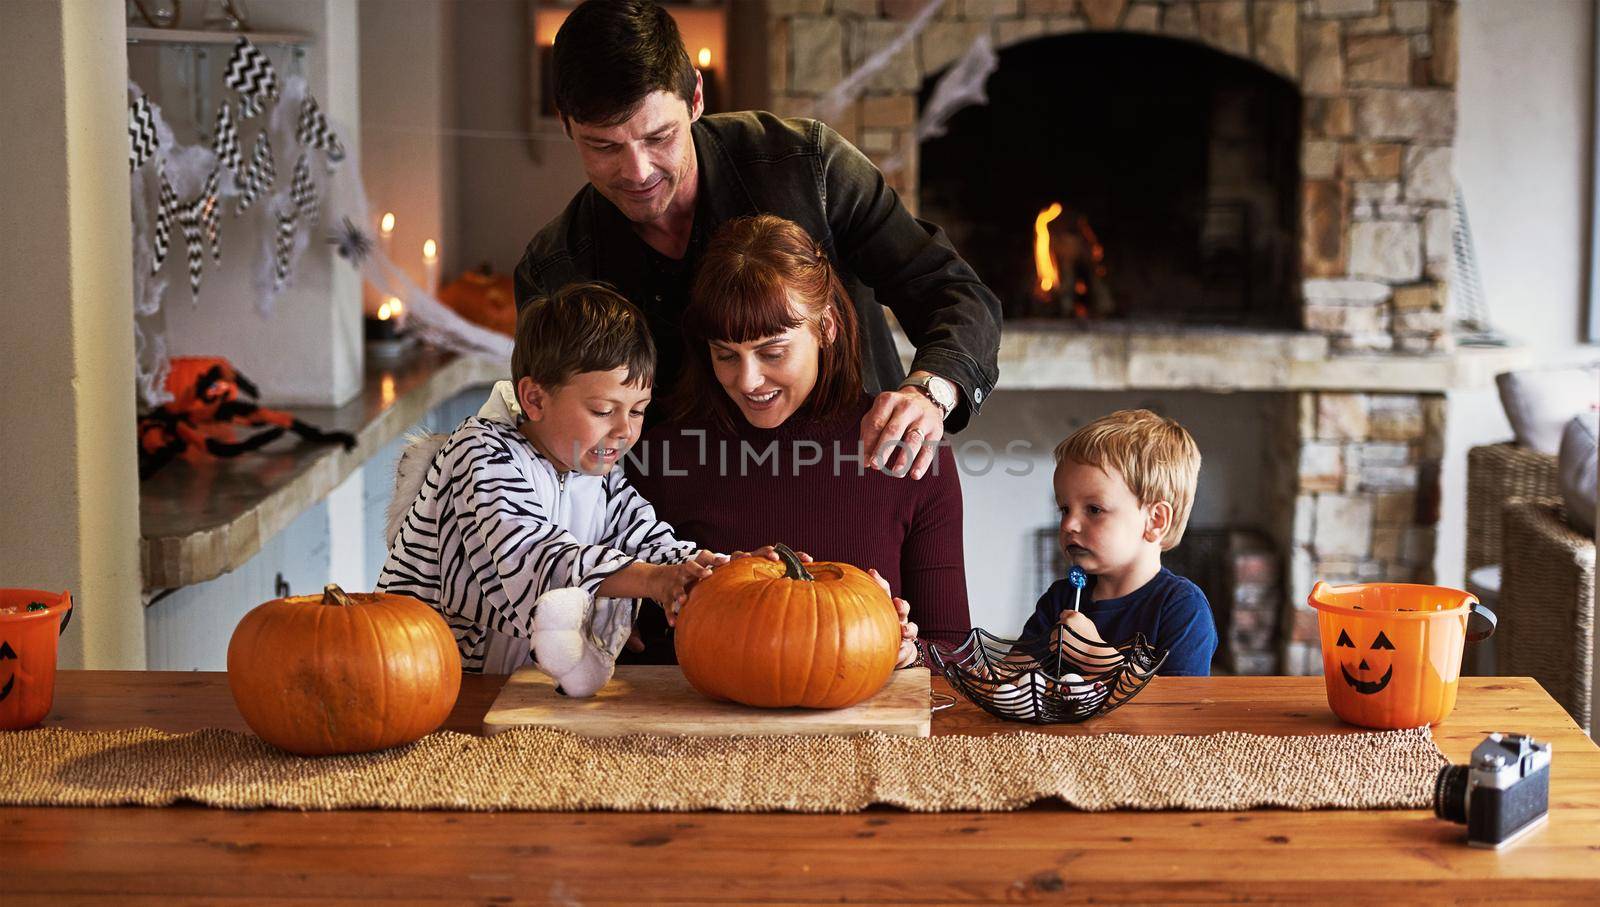 Our family is going to give you the creeps. an adorable young family carving out pumpkins and celebrating halloween together at home. by YuriArcurs